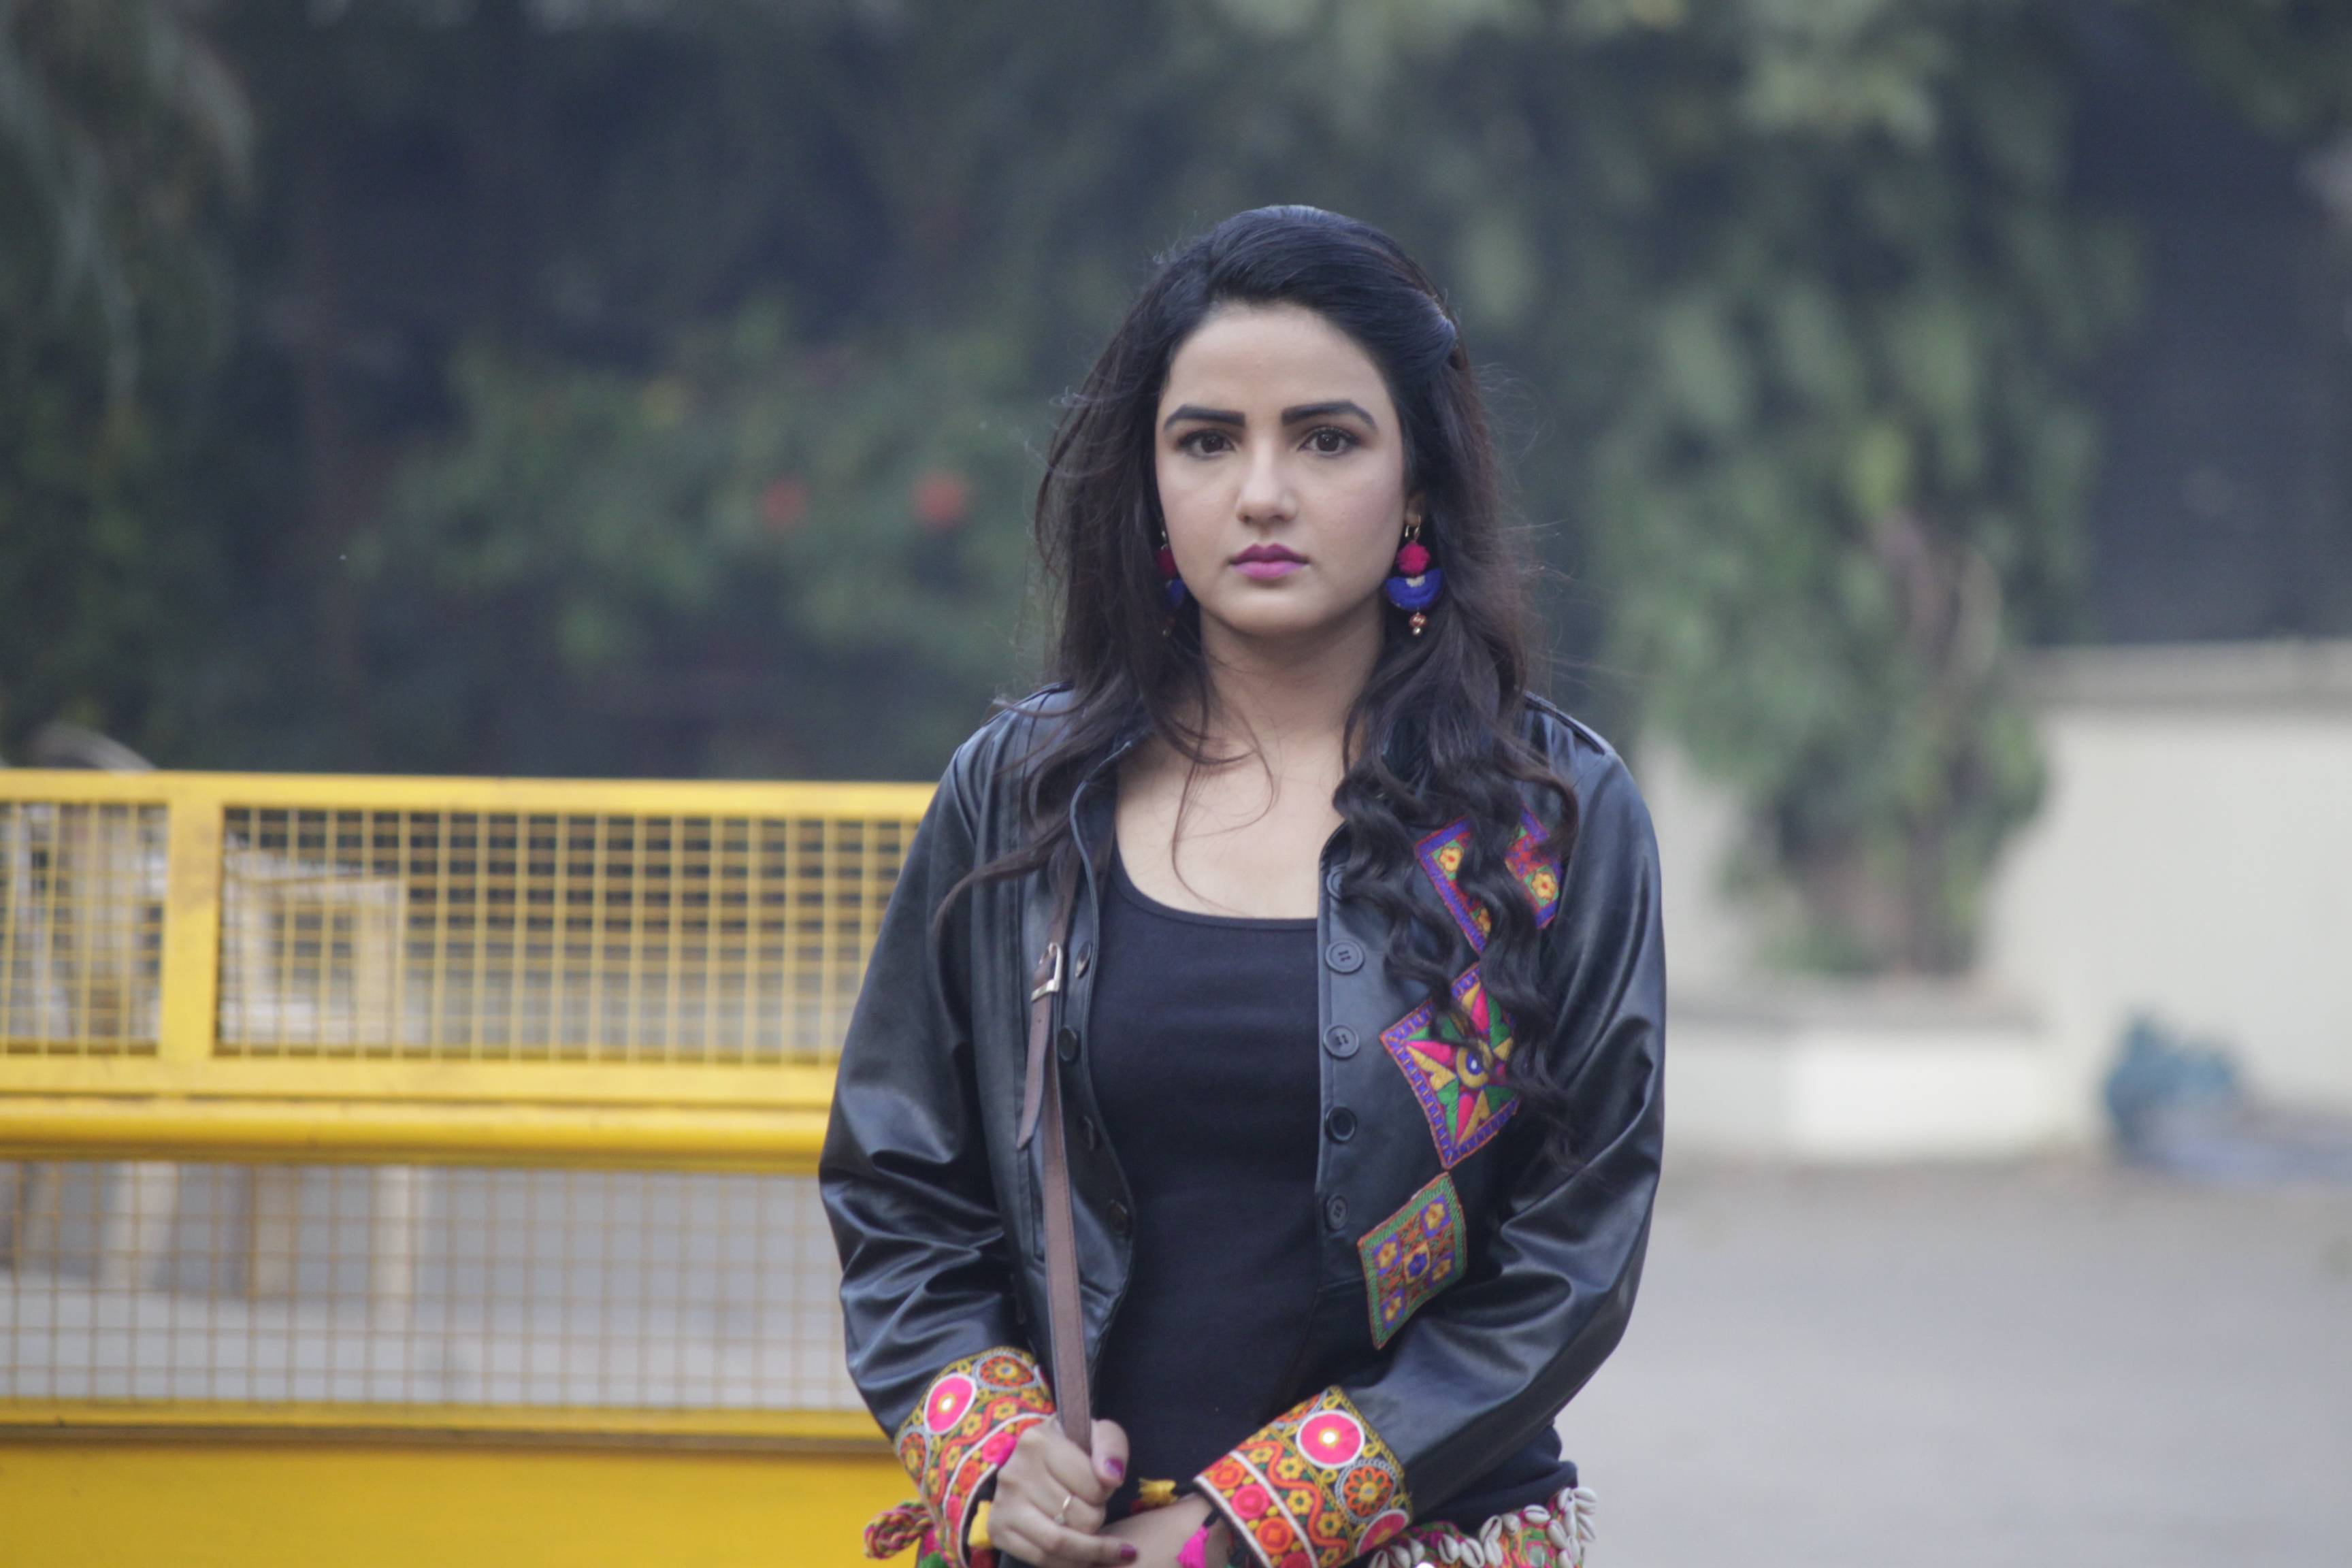 Teni plots her departure from Bhanushali family in Dil Se Dil Tak